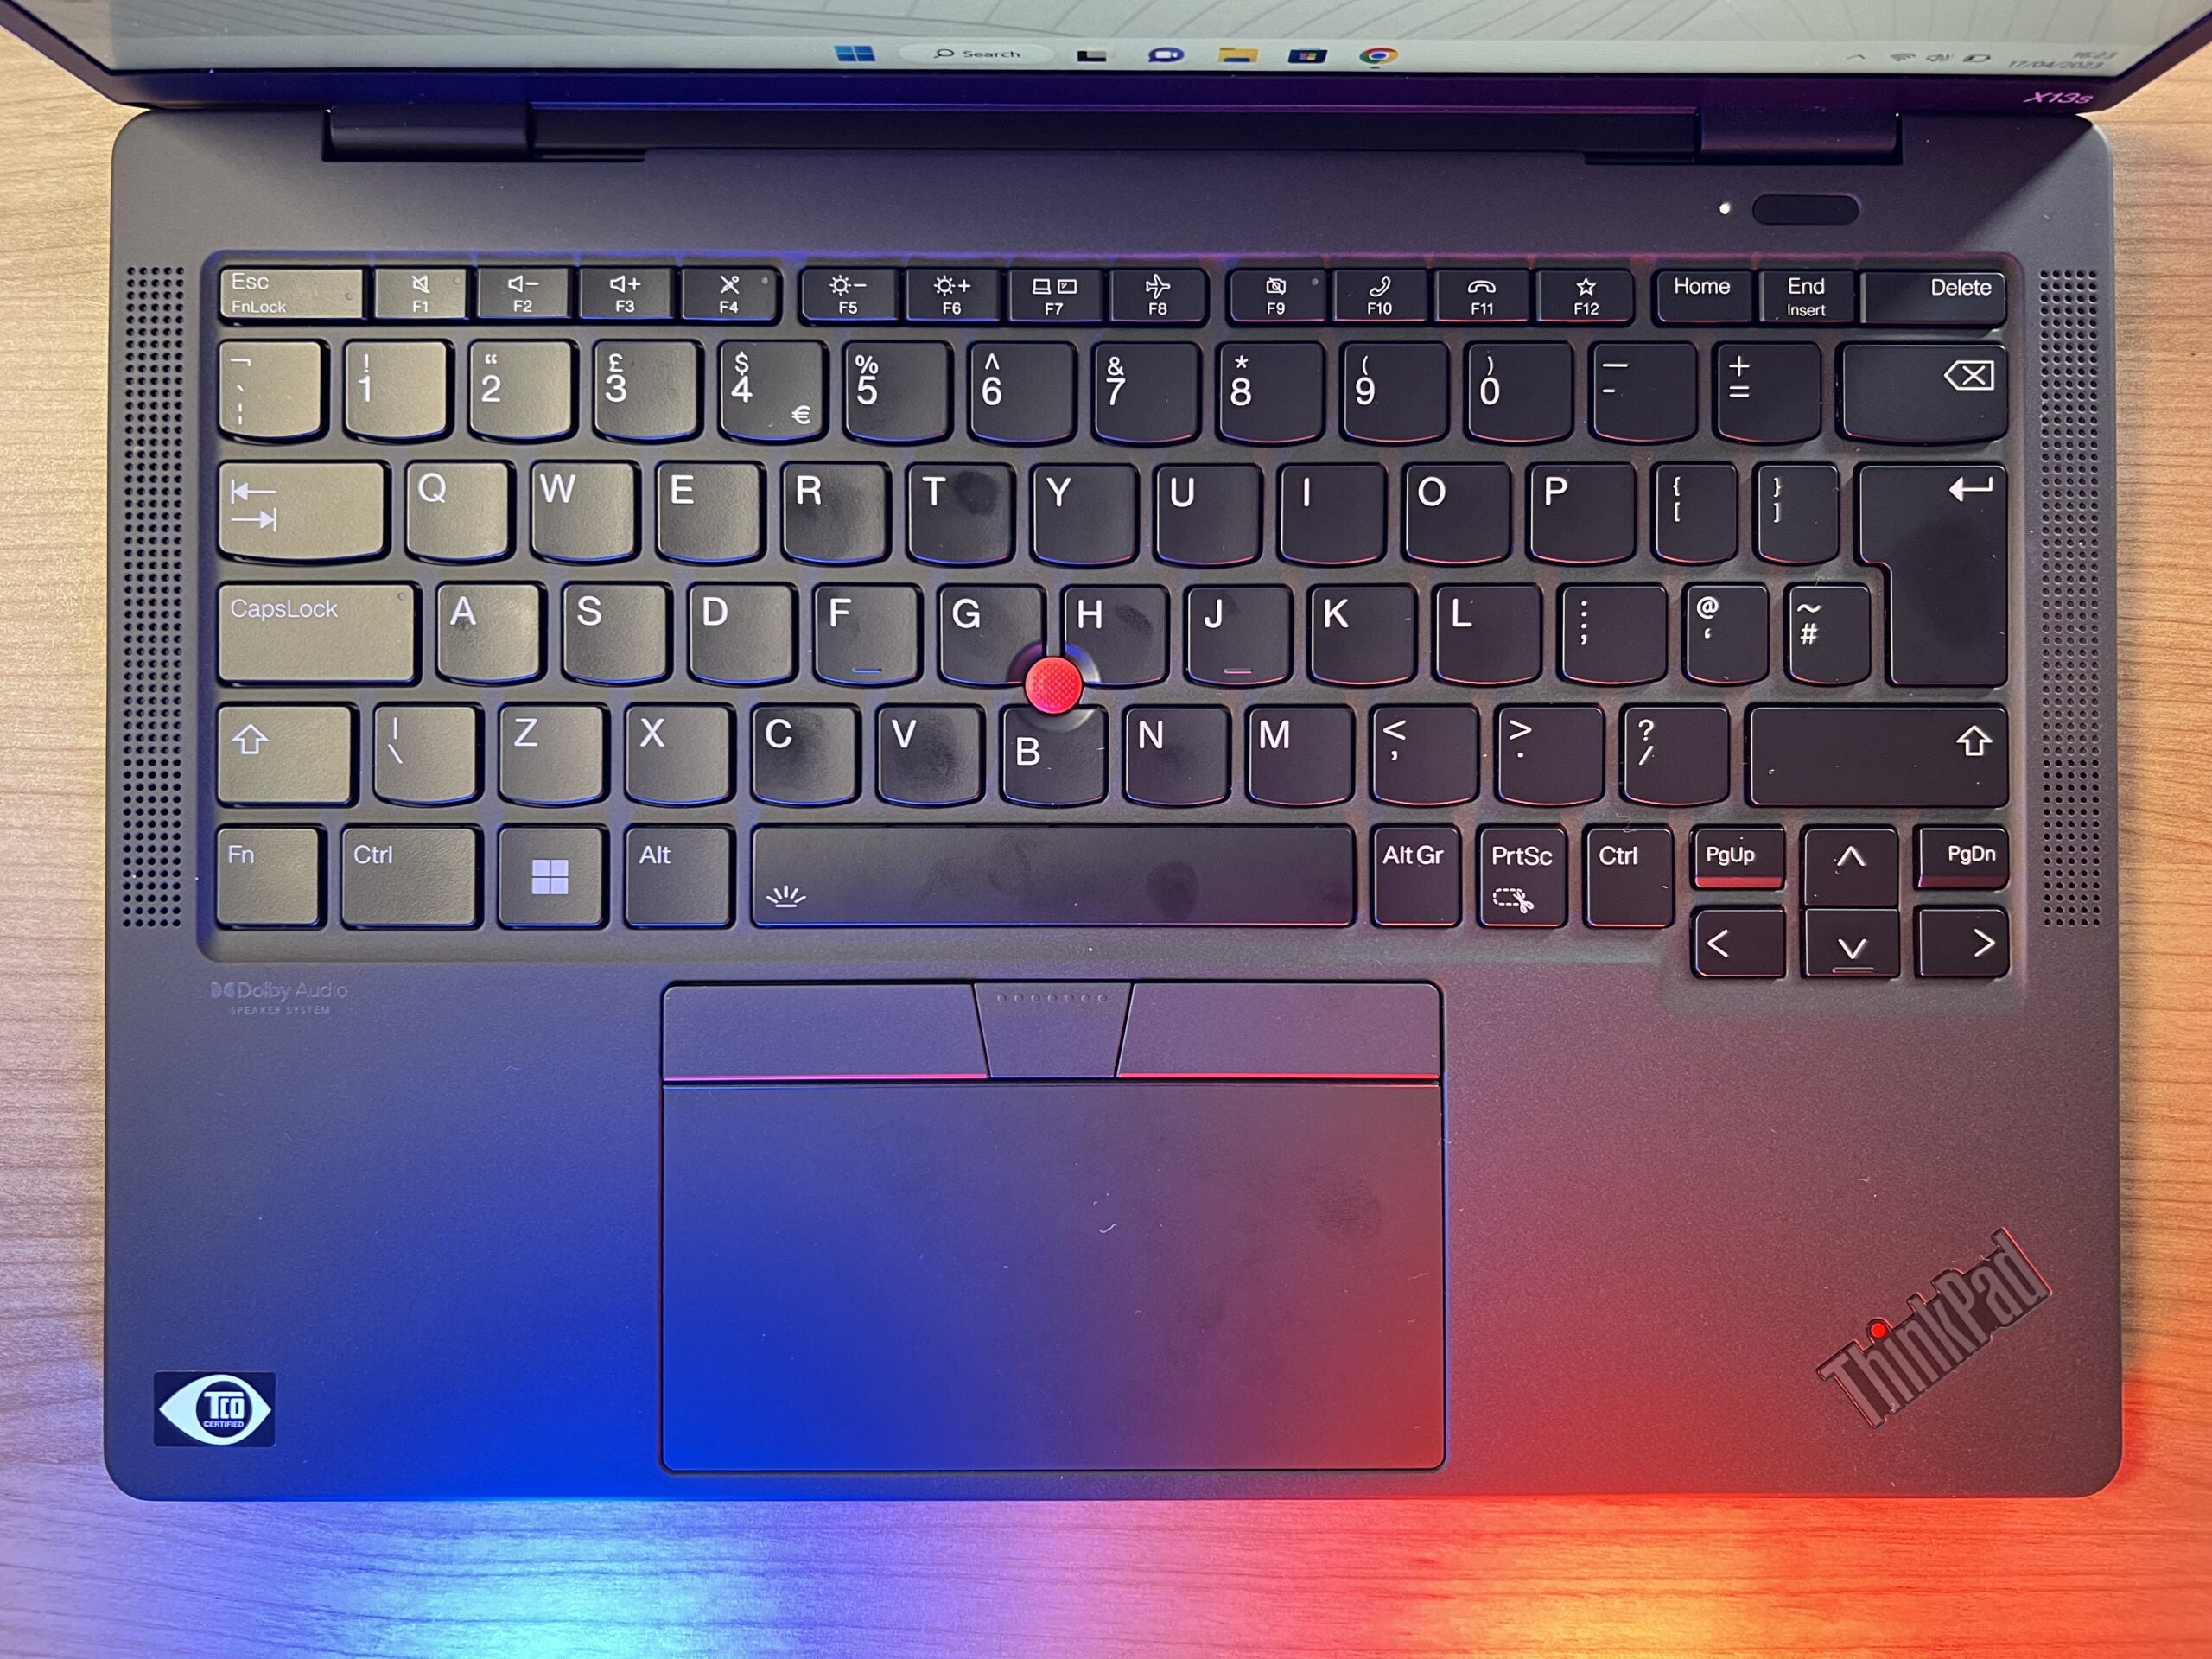 Lenovo LOQ 15 Core i7 Review: Affordable Legion option that tosses up an Intel vs AMD problem Reviews